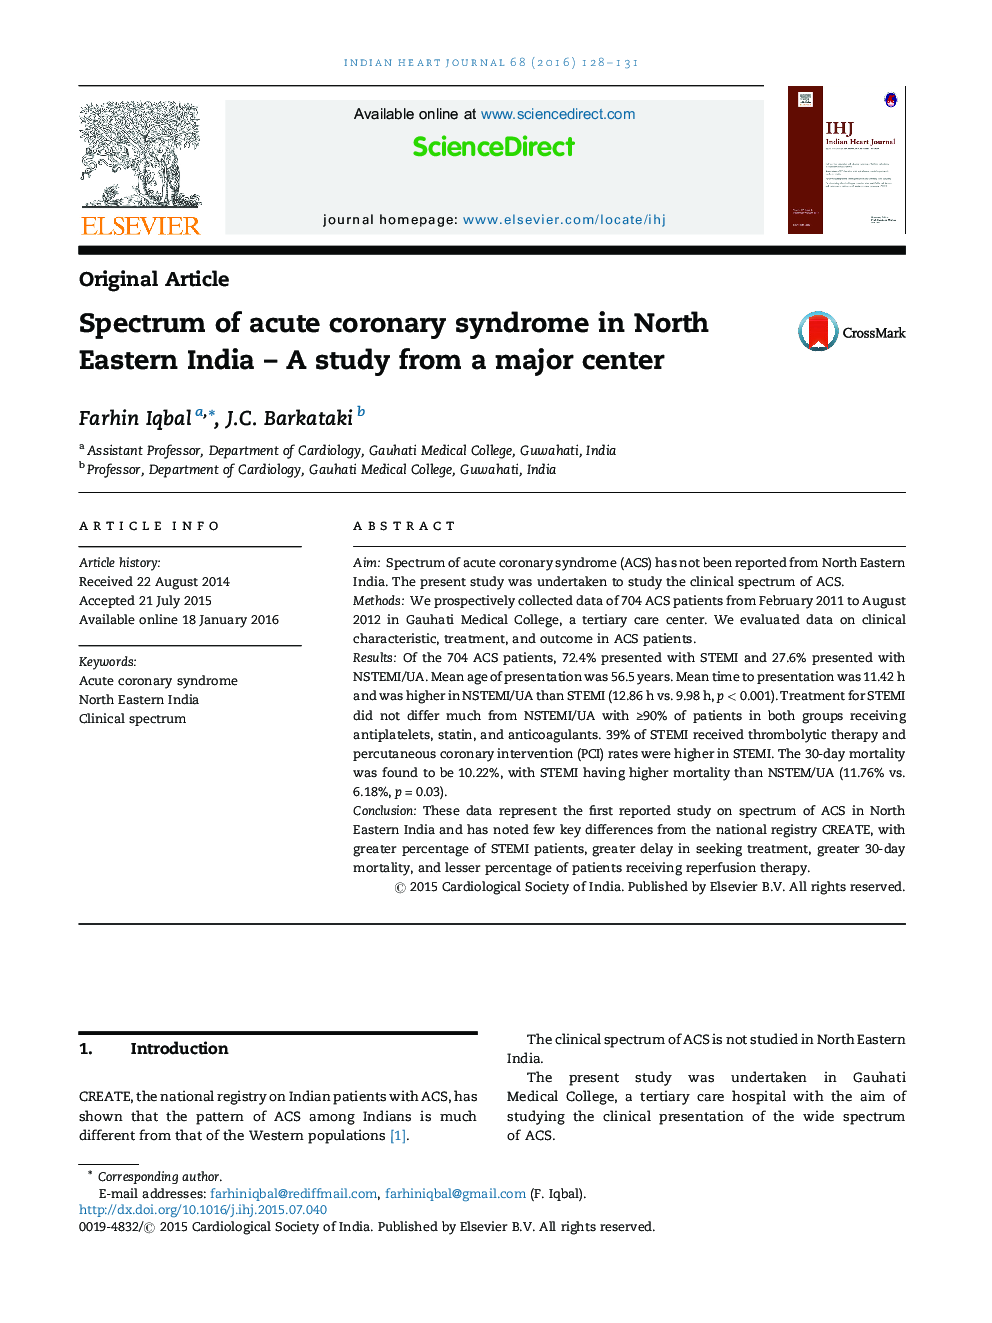 Spectrum of acute coronary syndrome in North Eastern India – A study from a major center